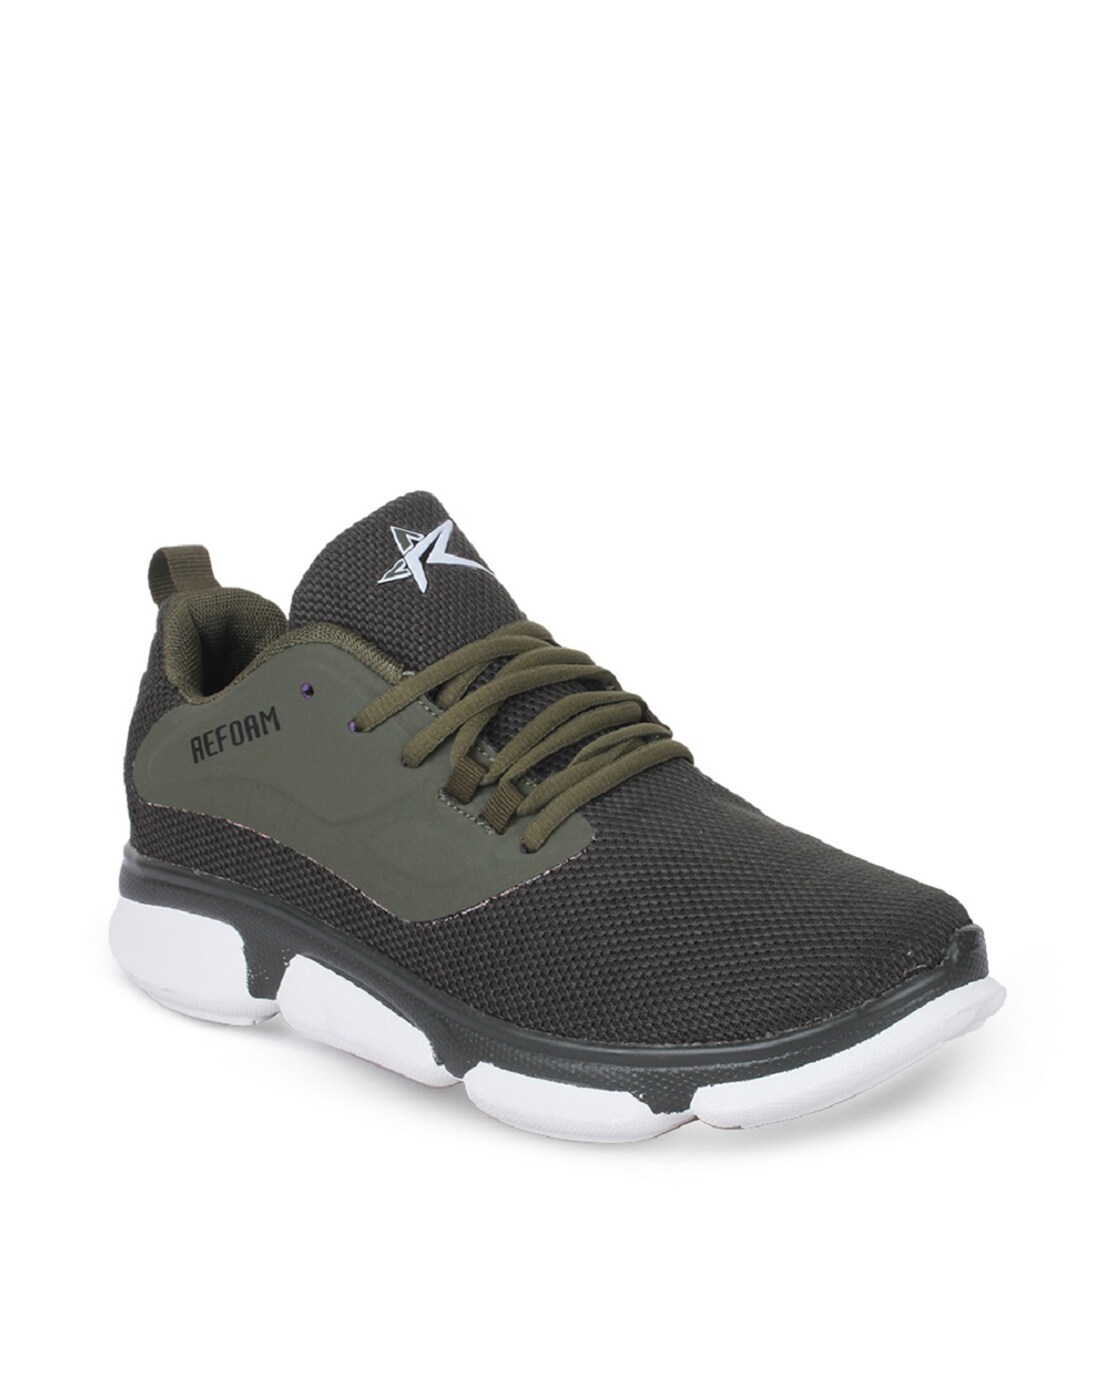 olive green training shoes